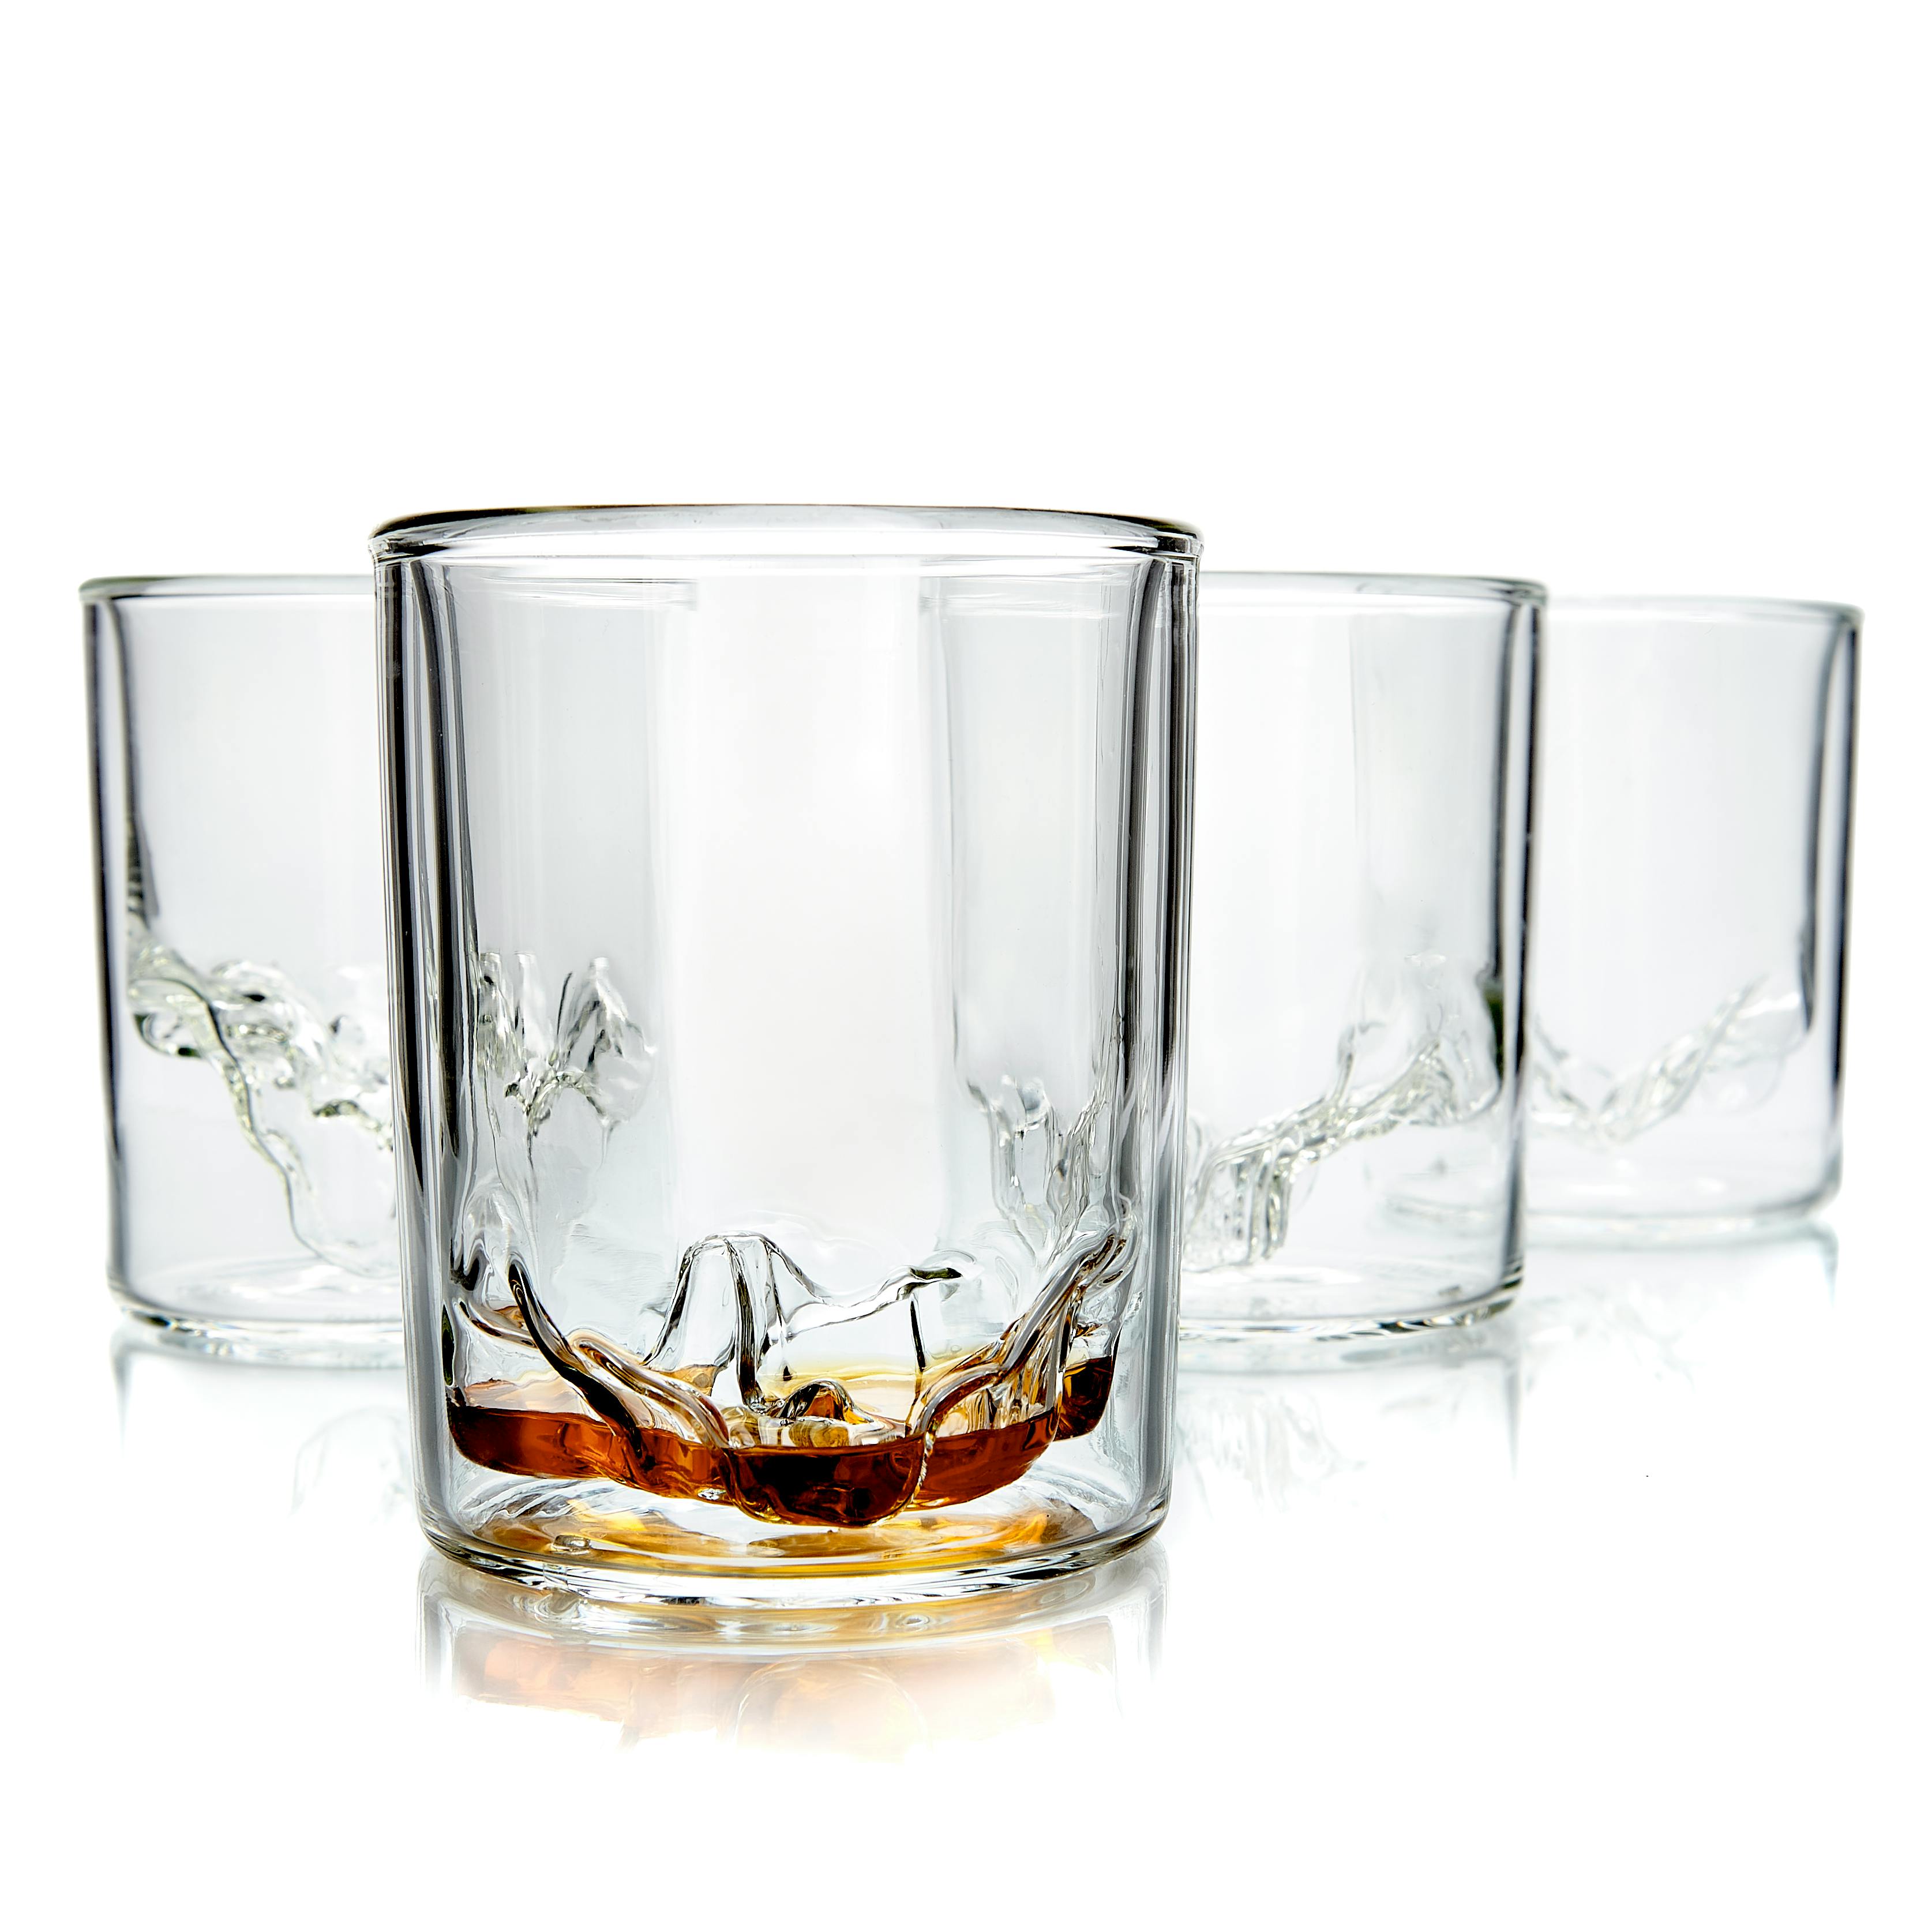 Set of 4 Rocks Glasses Hand Blown Drinking Glasses Made in USA 